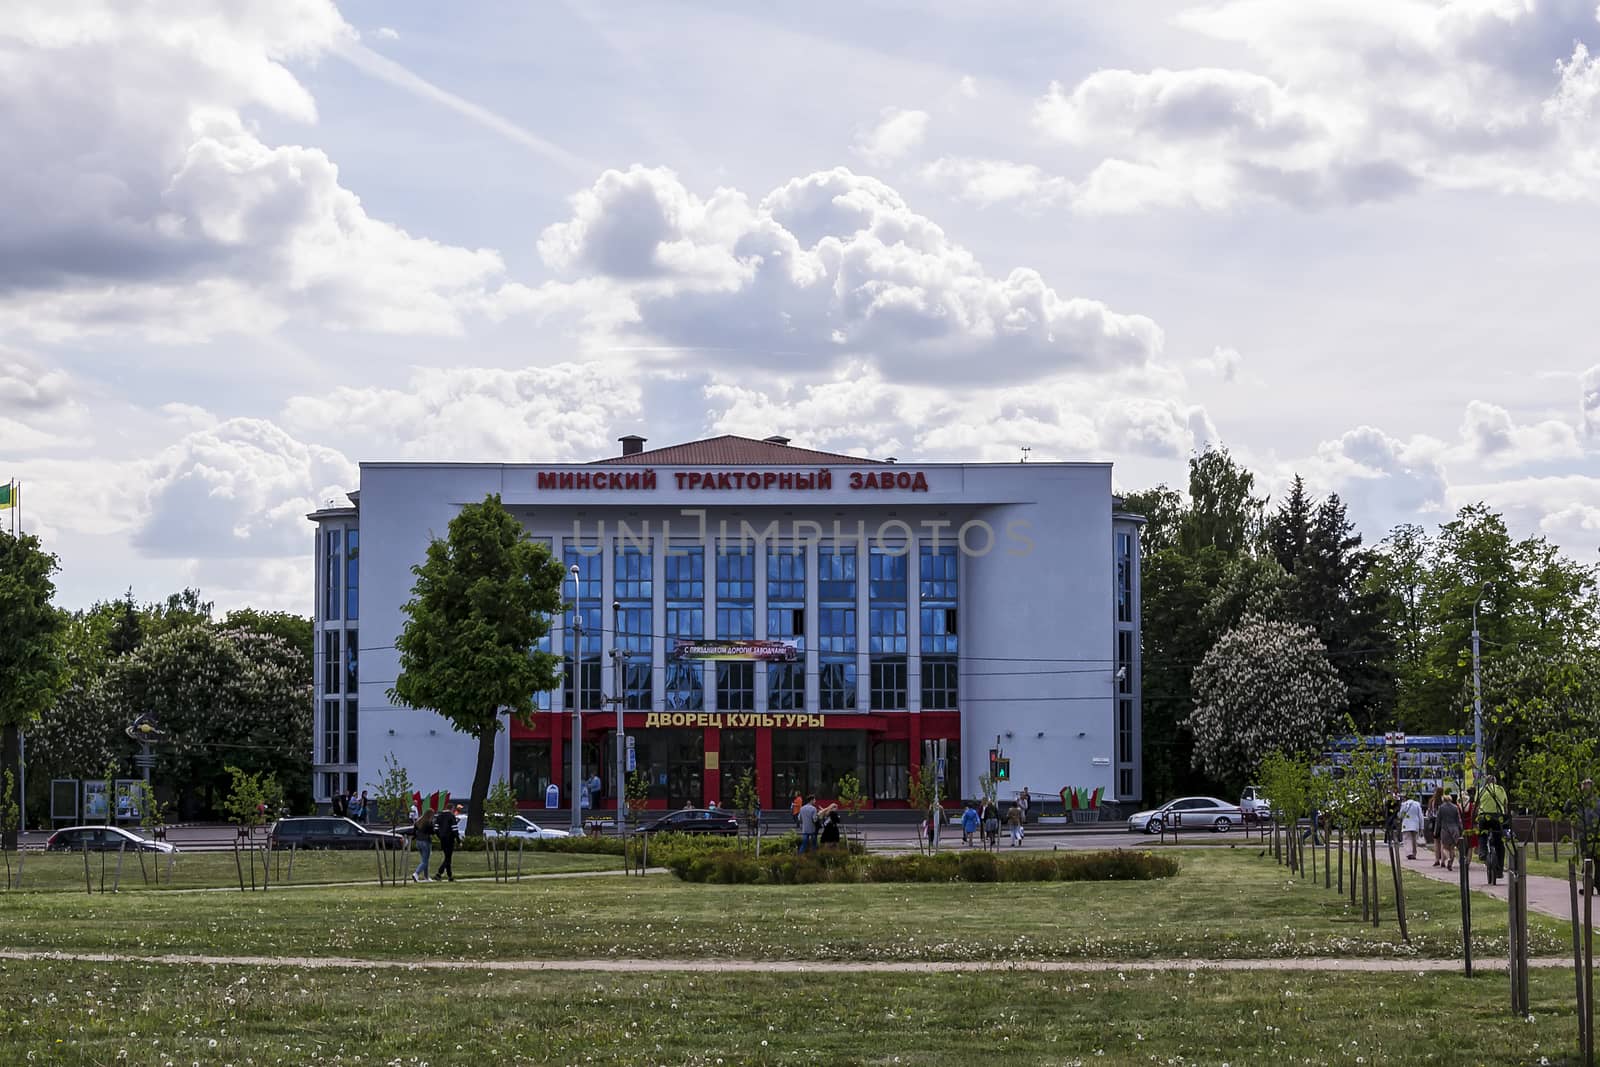 The building of the Palace of Culture of the Minsk Tractor Plant by Grommik